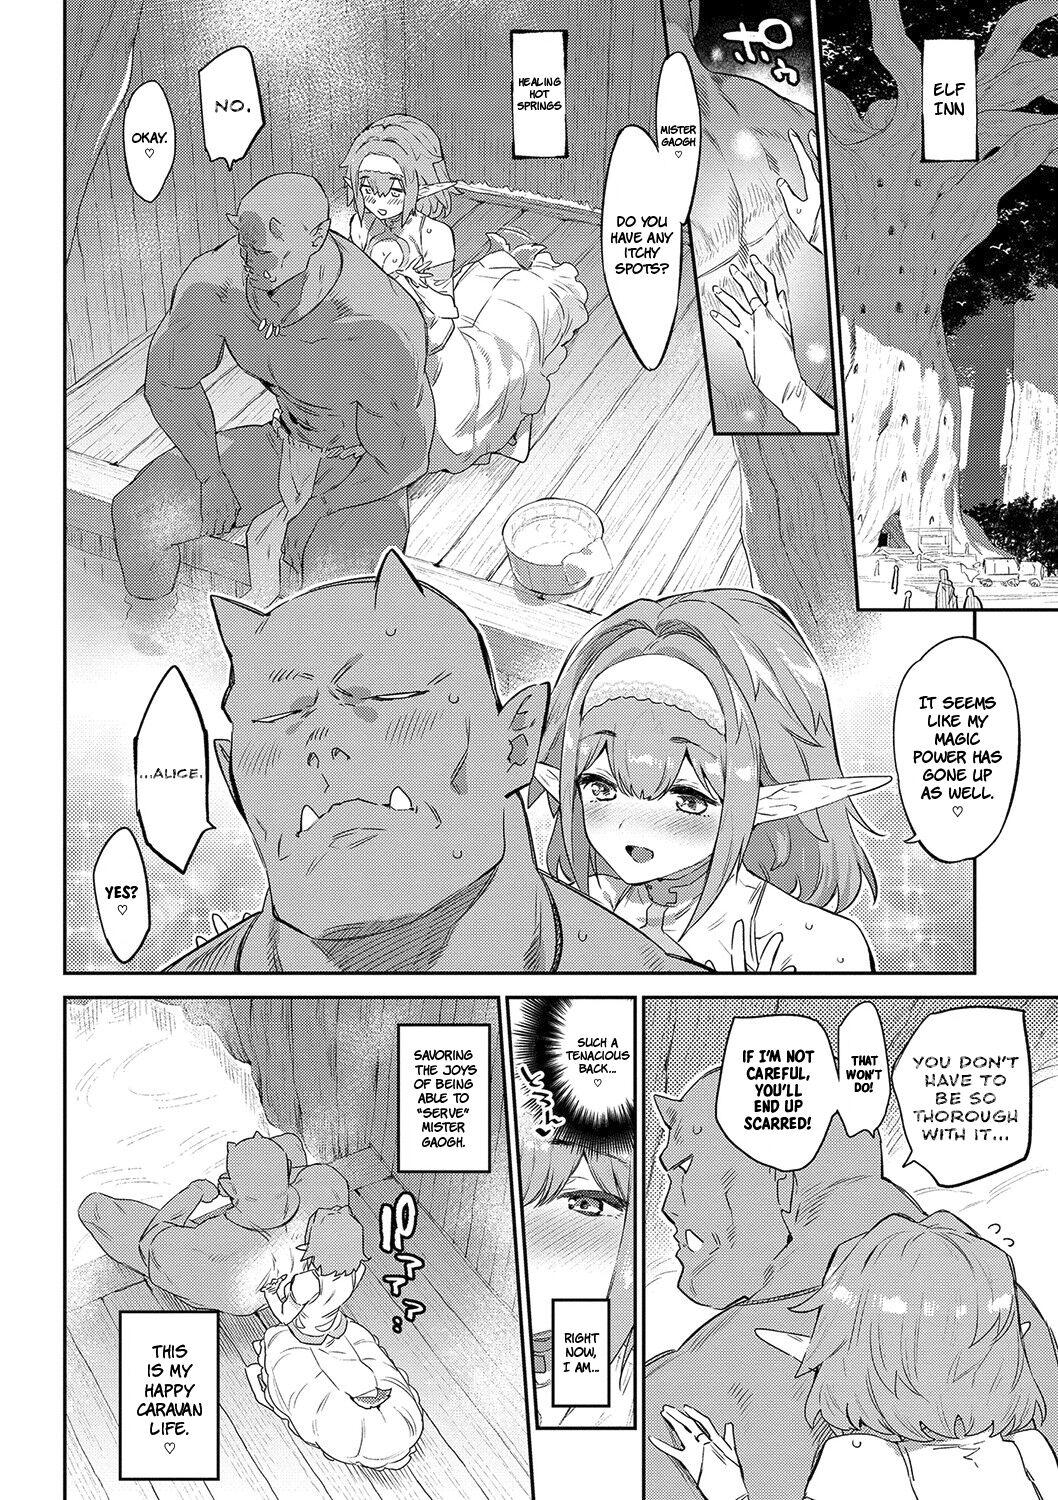 Furry Ihou no Otome - Monster Girls in Another World Teen - Page 7